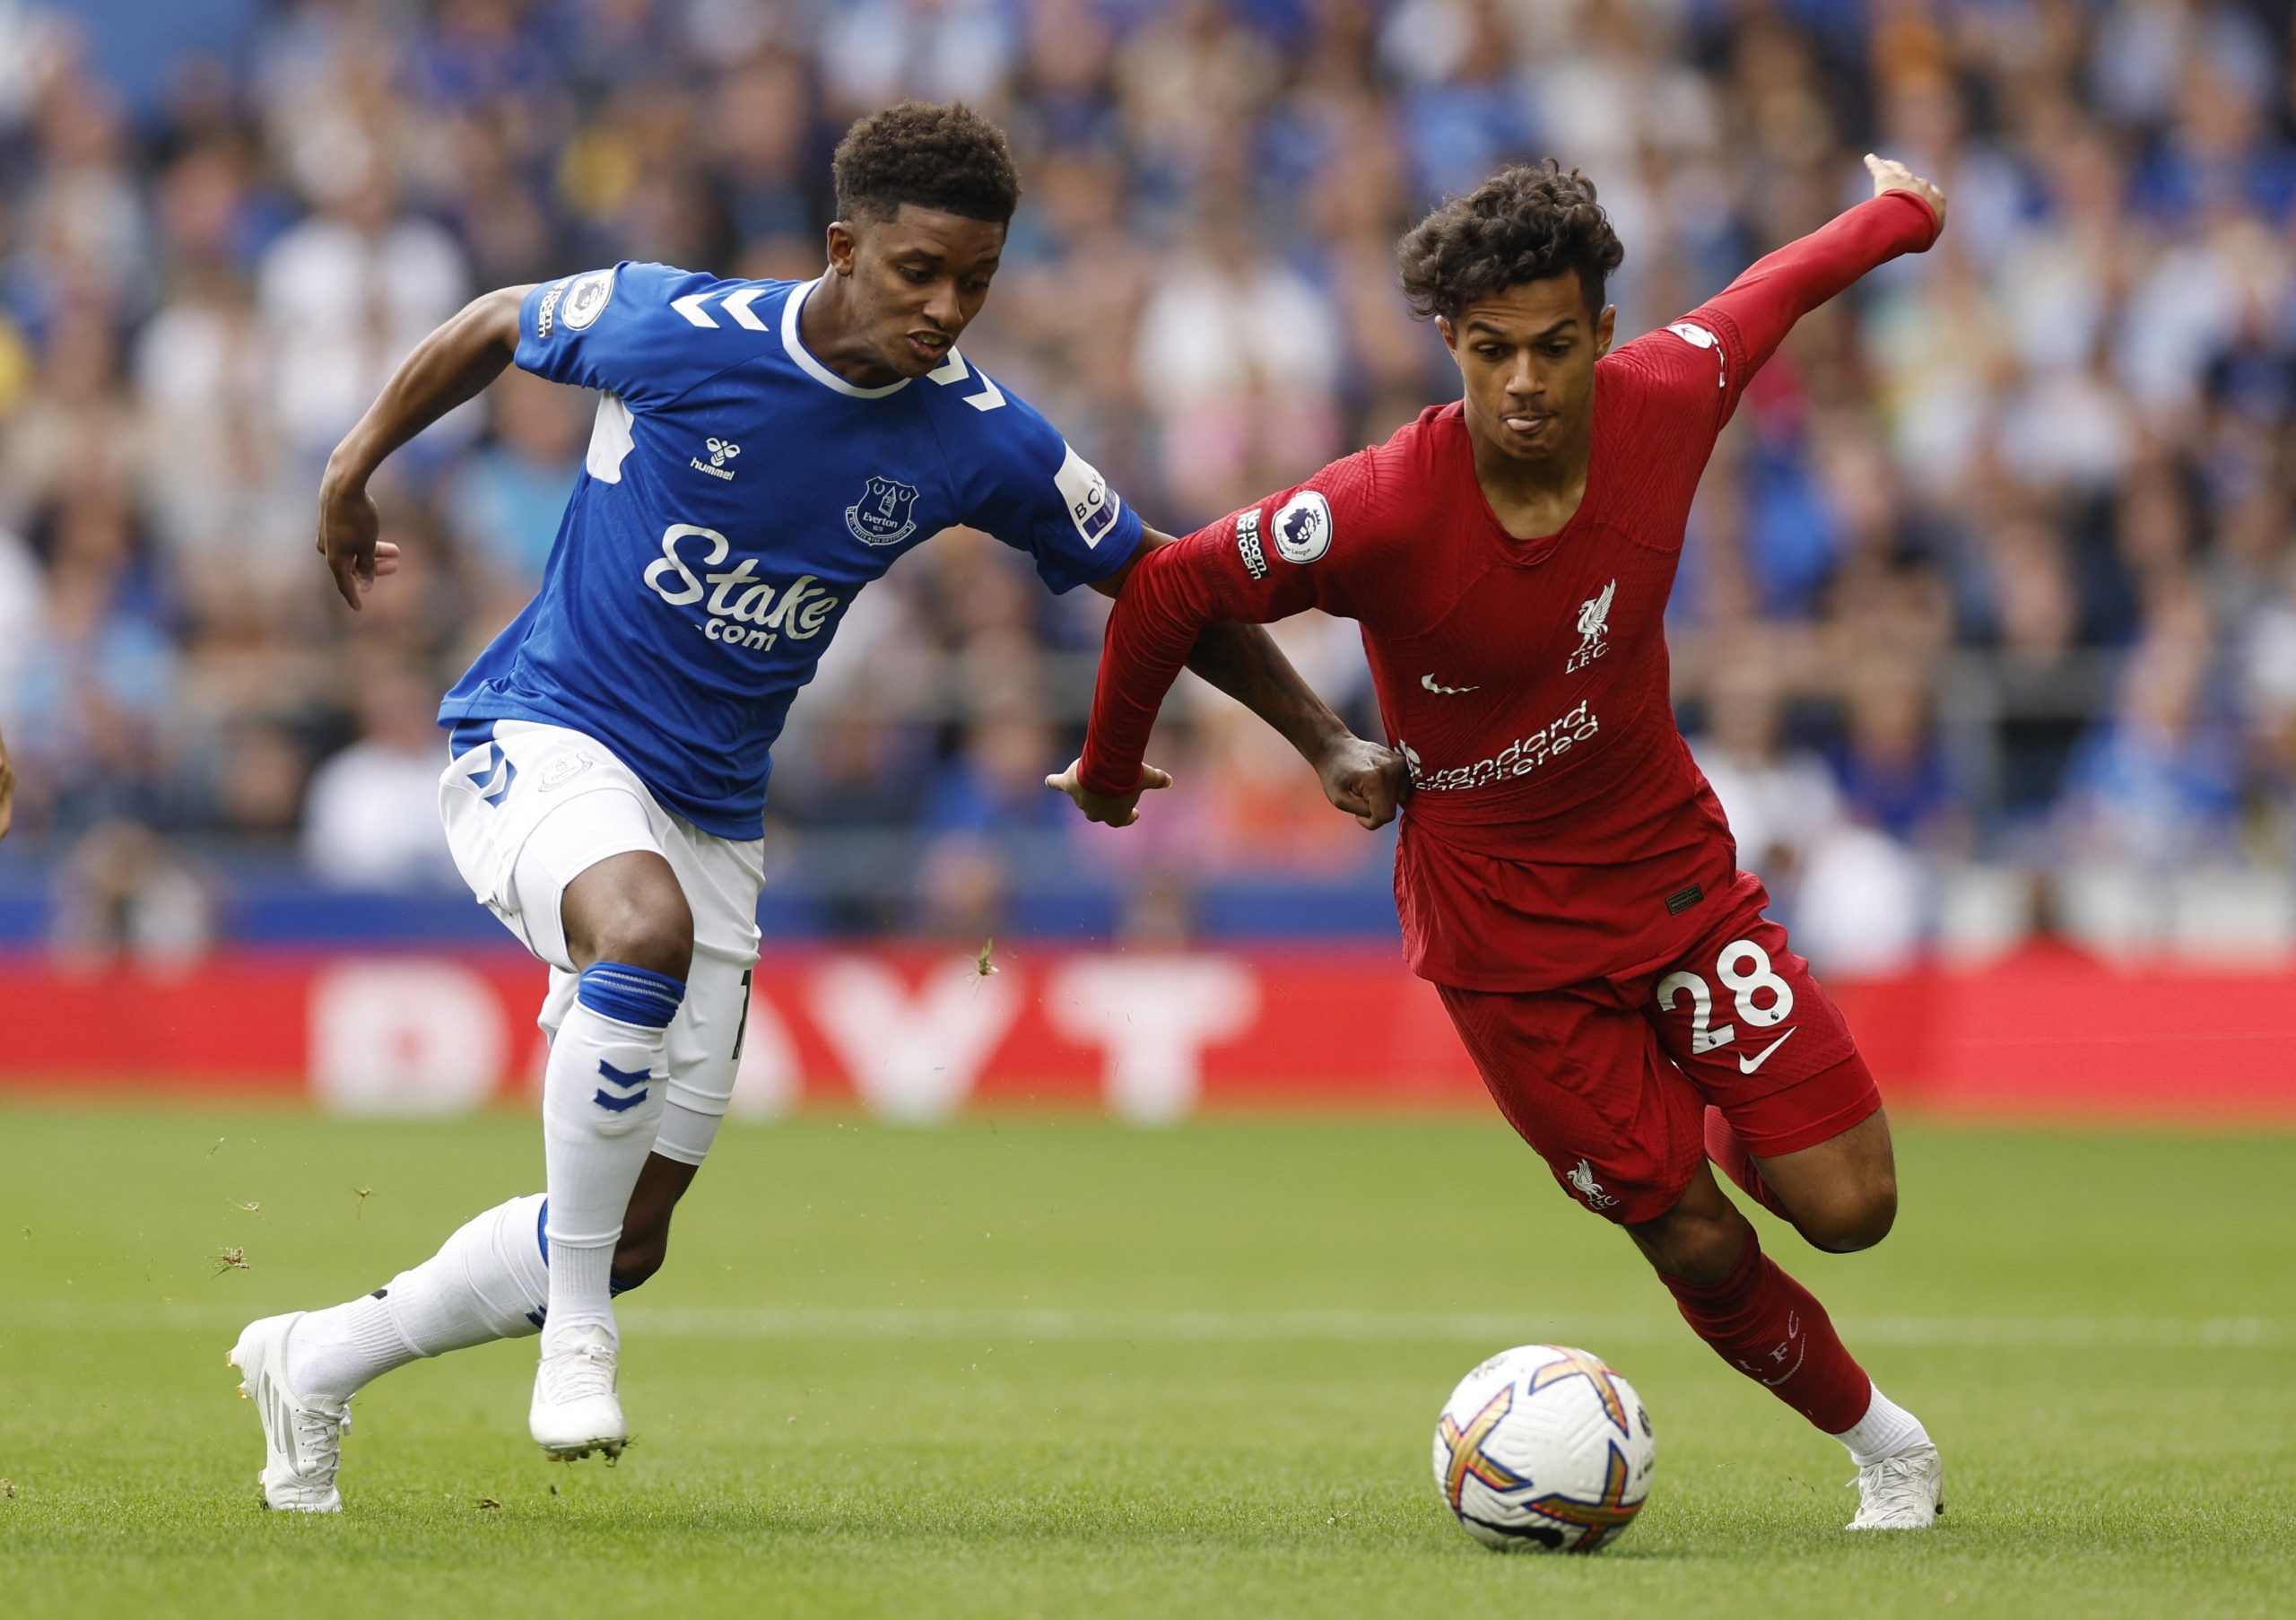 Soccer Football - Premier League - Everton v Liverpool - Goodison Park, Liverpool, Britain - September 3, 2022 Liverpool's Fabio Carvalho in action with Everton's Demarai Gray Action Images via Reuters/Jason Cairnduff EDITORIAL USE ONLY. No use with unauthorized audio, video, data, fixture lists, club/league logos or 'live' services. Online in-match use limited to 75 images, no video emulation. No use in betting, games or single club /league/player publications.  Please contact your account repr